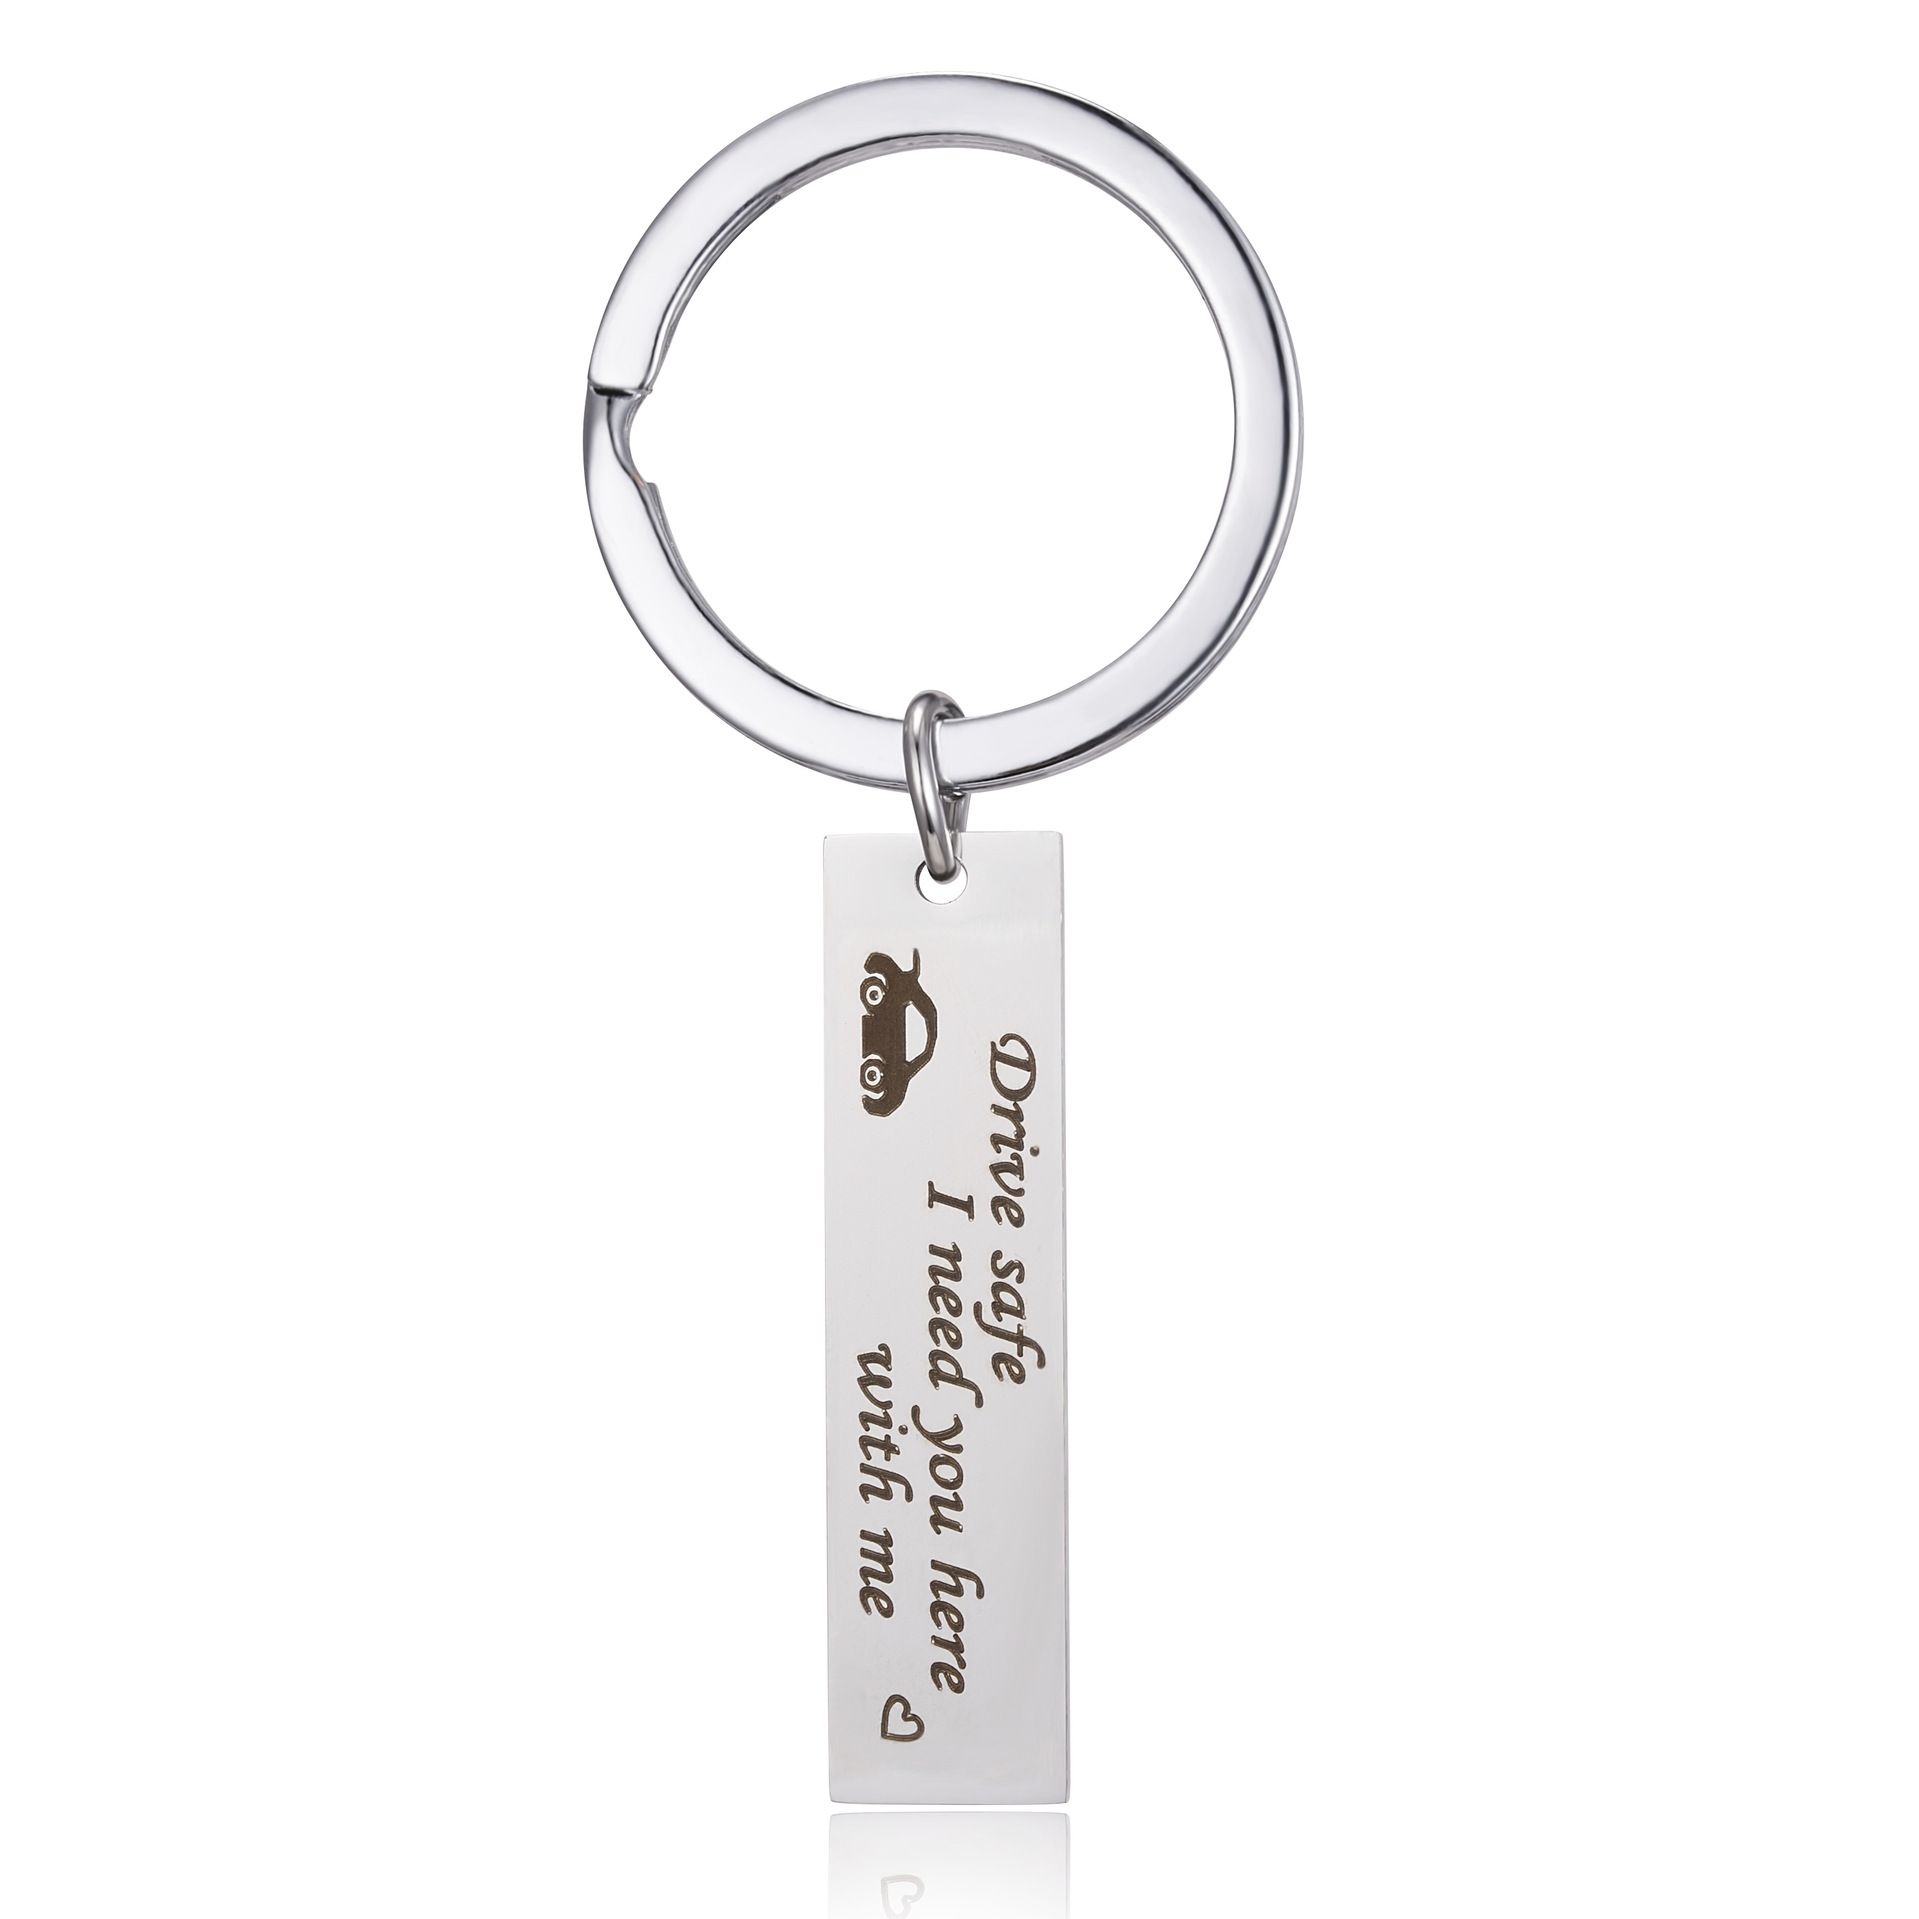 Stainless Steel Drive Safe Keyring Personalized Name Keychain Key Chain Gifts